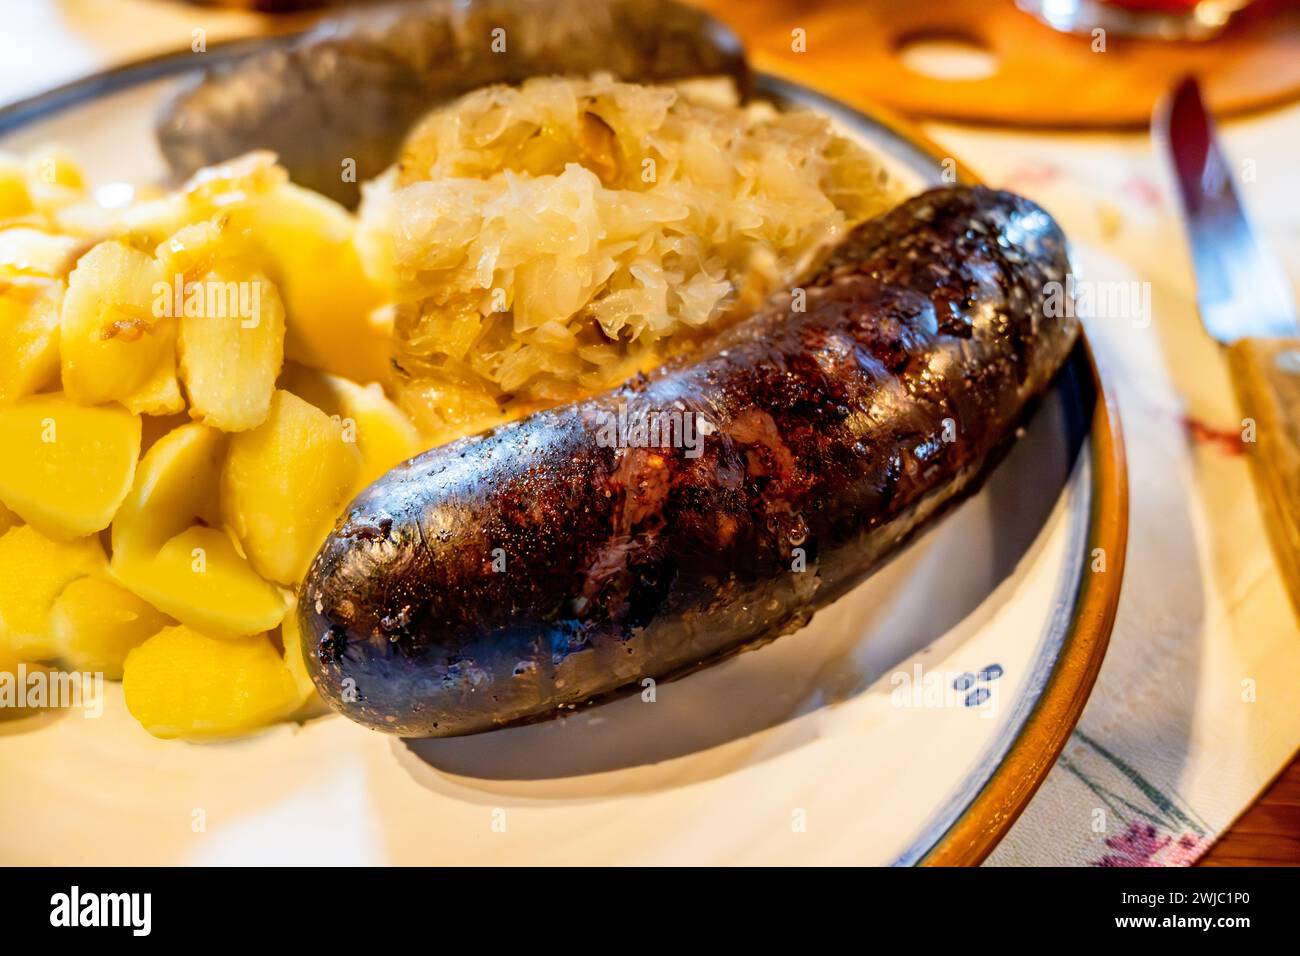 Grilled black pudding (sausage) with stewed cabbage and boiled potato, closeup. Stock Photo